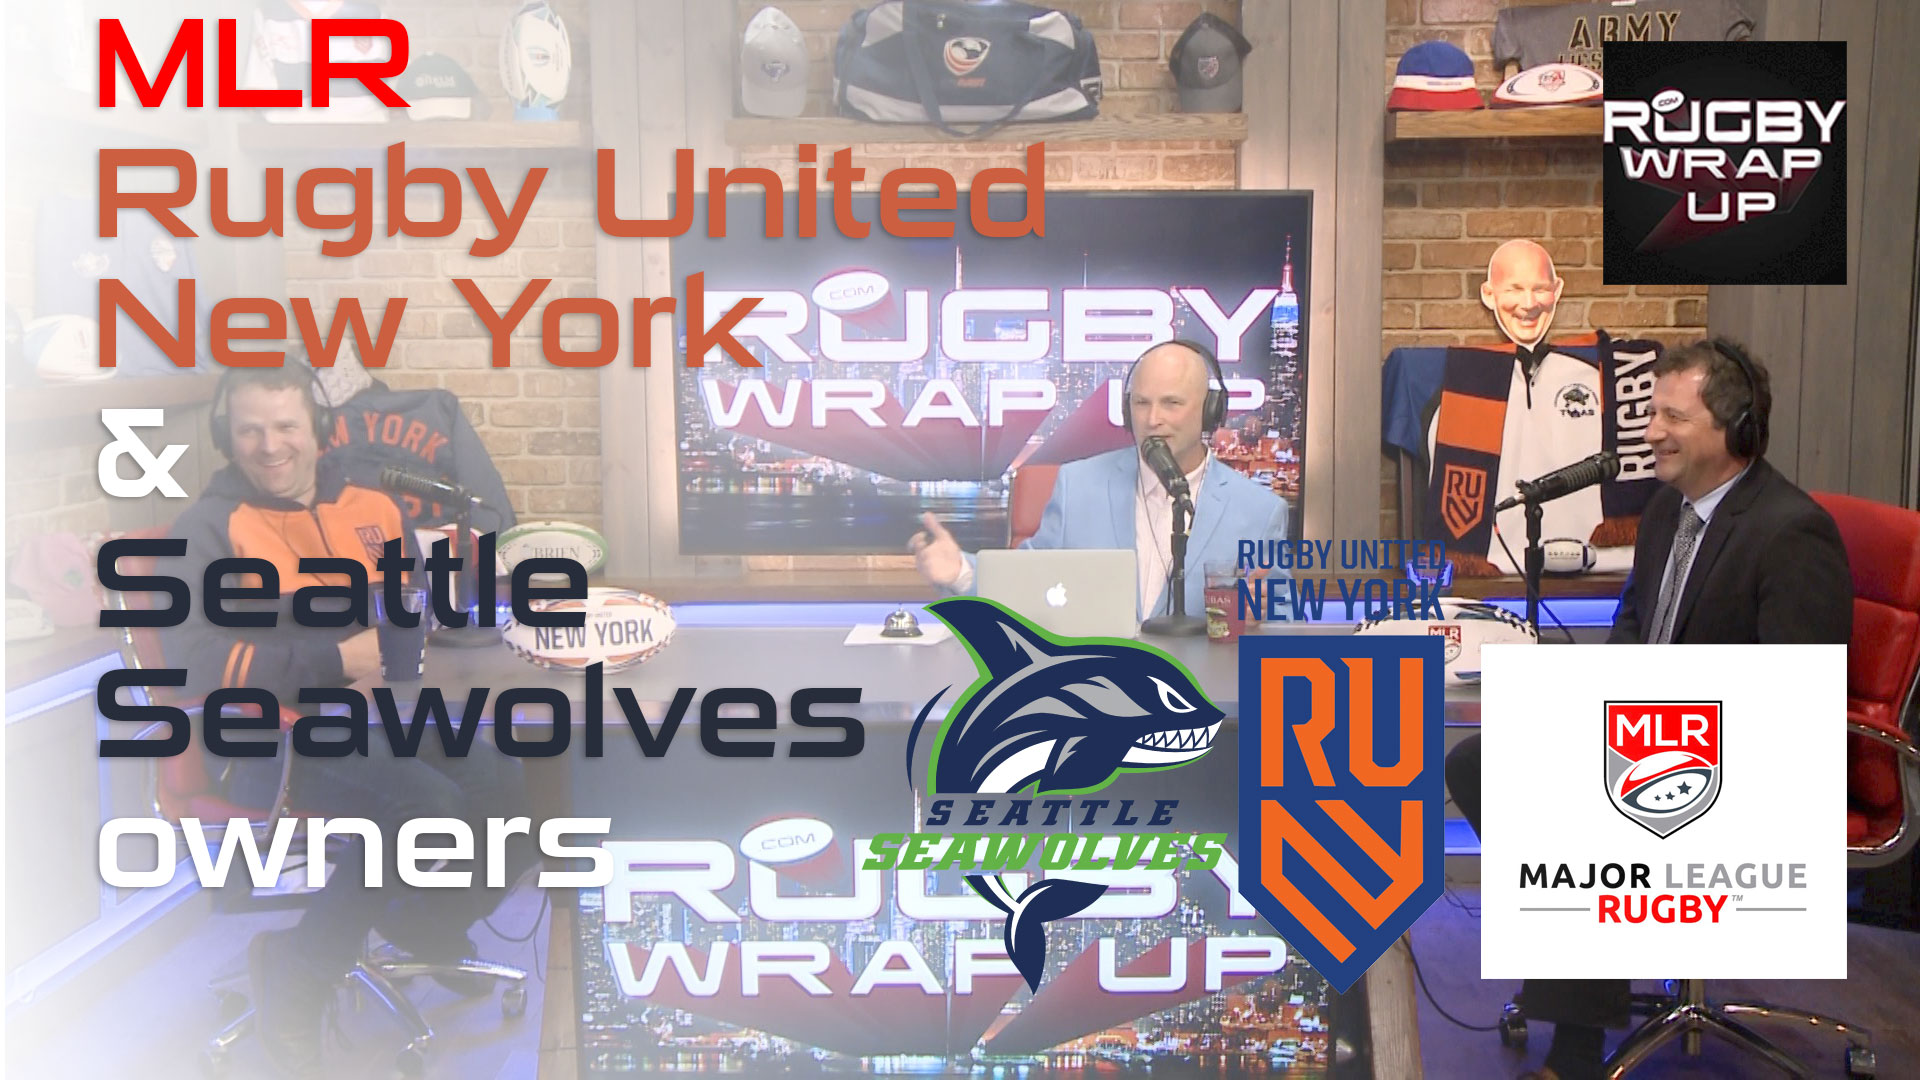 Major_League_Rugby, Rugby_Wrap_Up, Adrian_Balfour, James_Kennedy, Seawolves, Rugby_United_NY